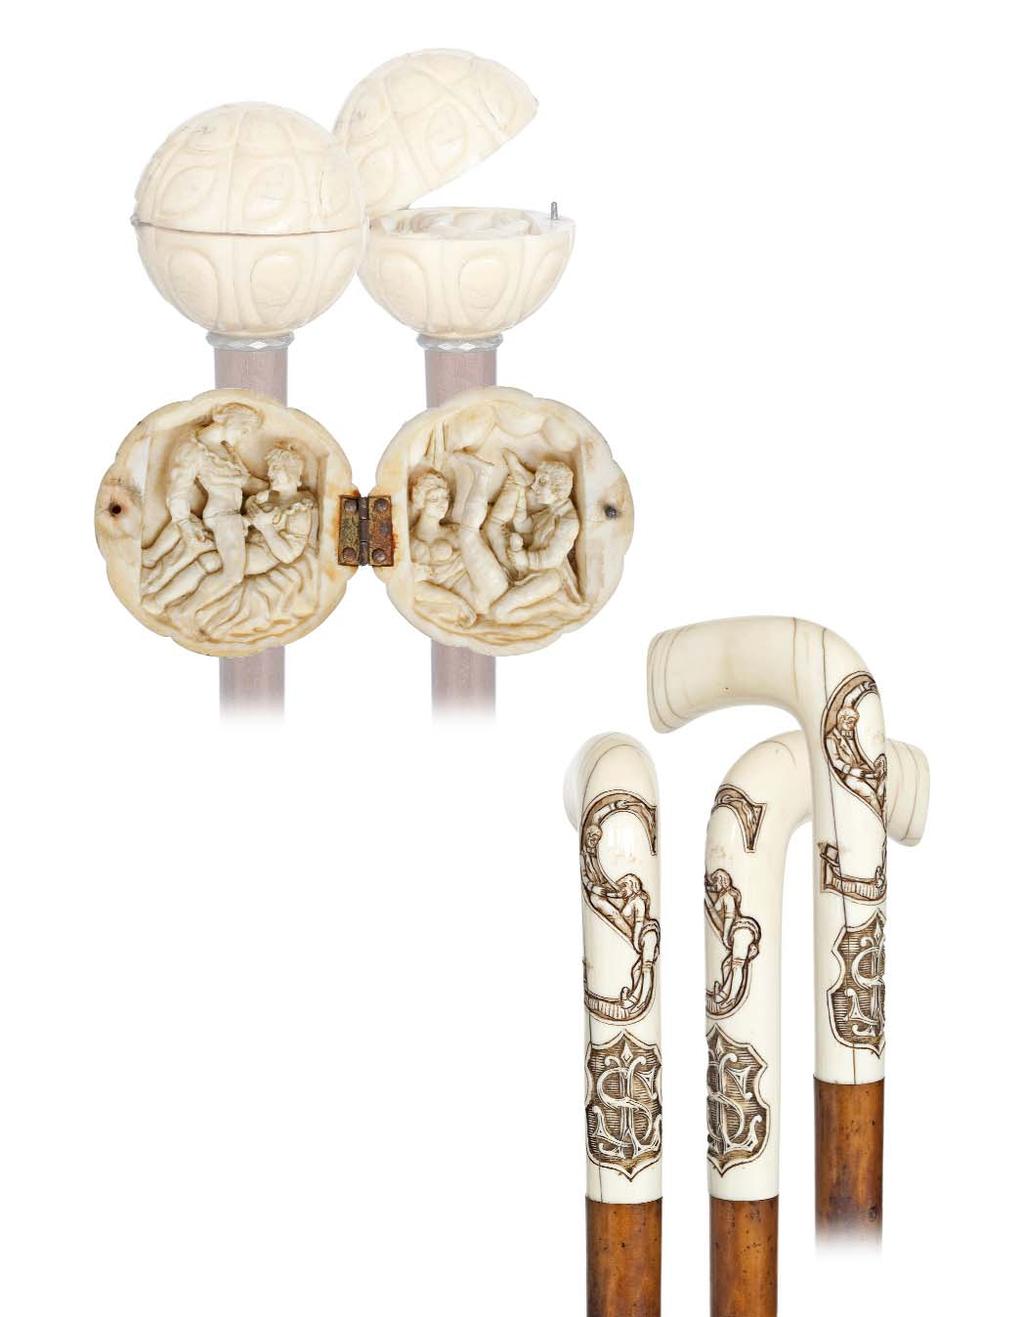 65. Erotic Ivory Ball Cane Ca. 1880-This is one of the best carvings that we have seen in this style.